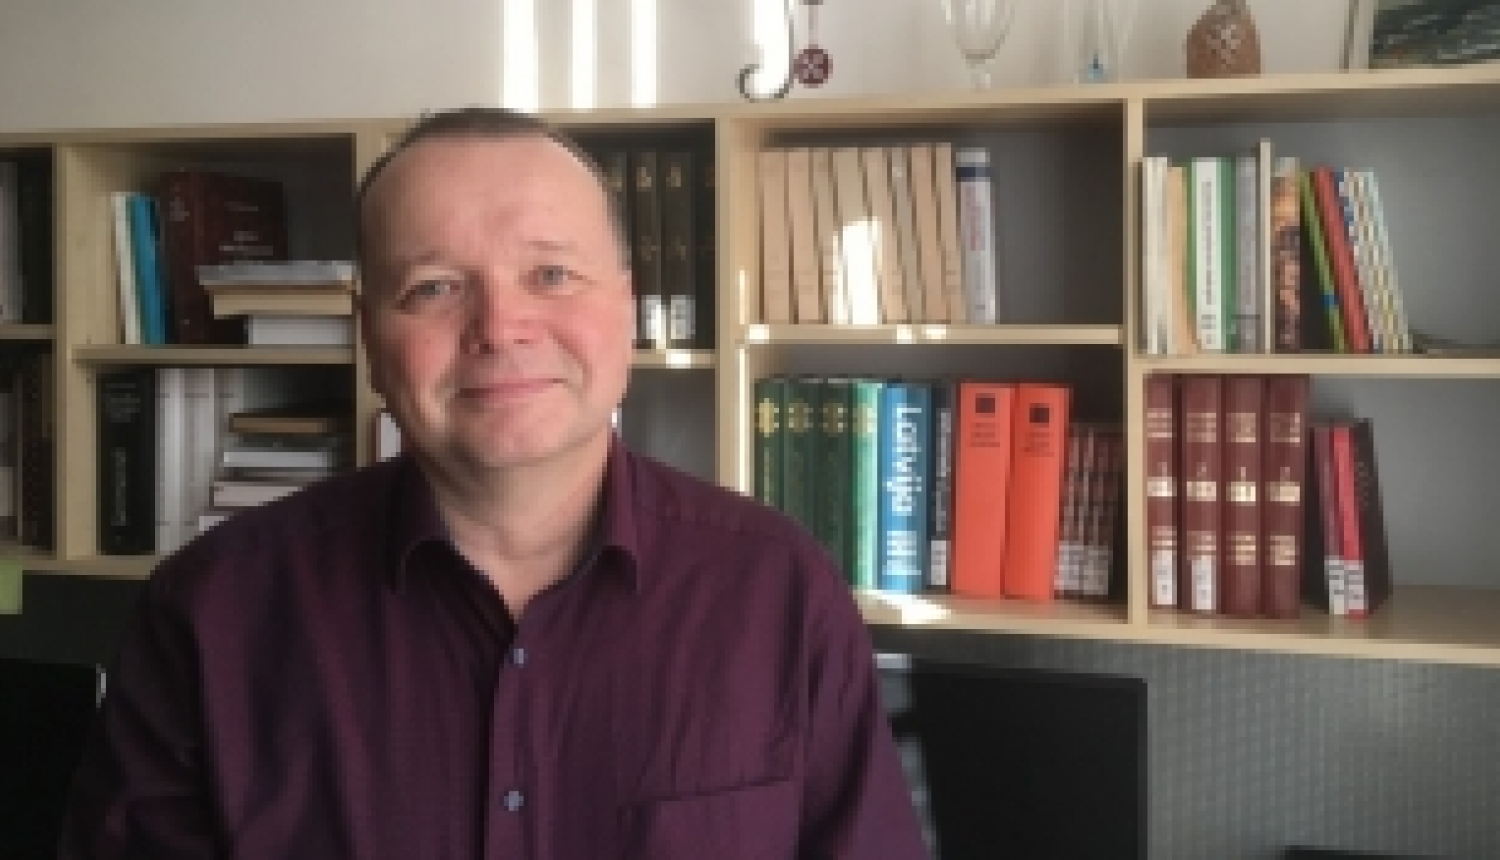 An assistant professor from Czechia conducts research on Czech-Latvian cultural ties